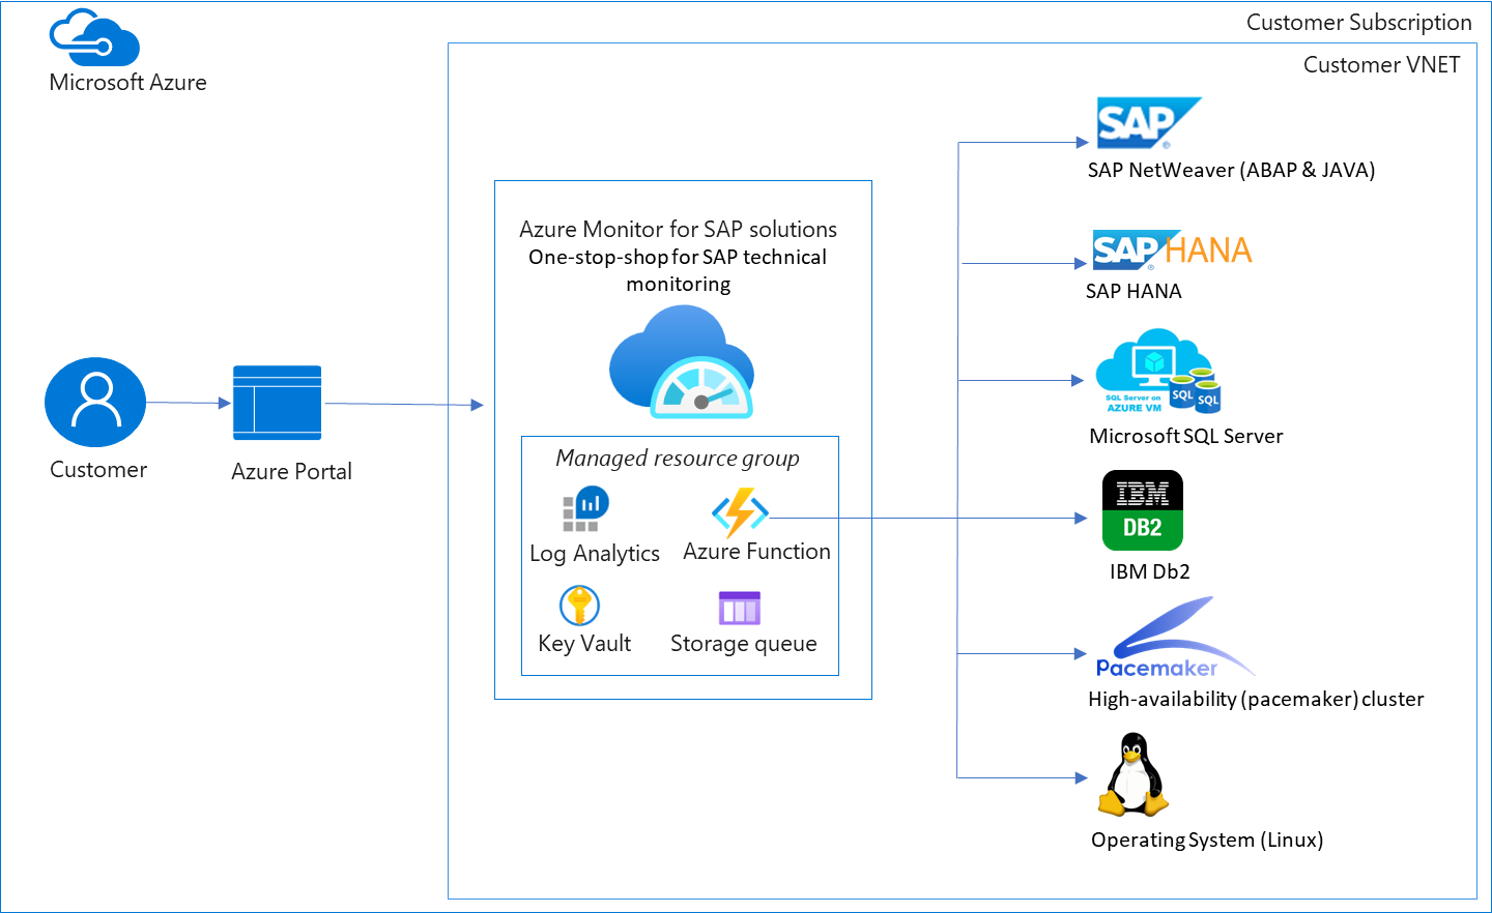 Diagram that shows the architecture of Azure Monitor for S A P solutions.